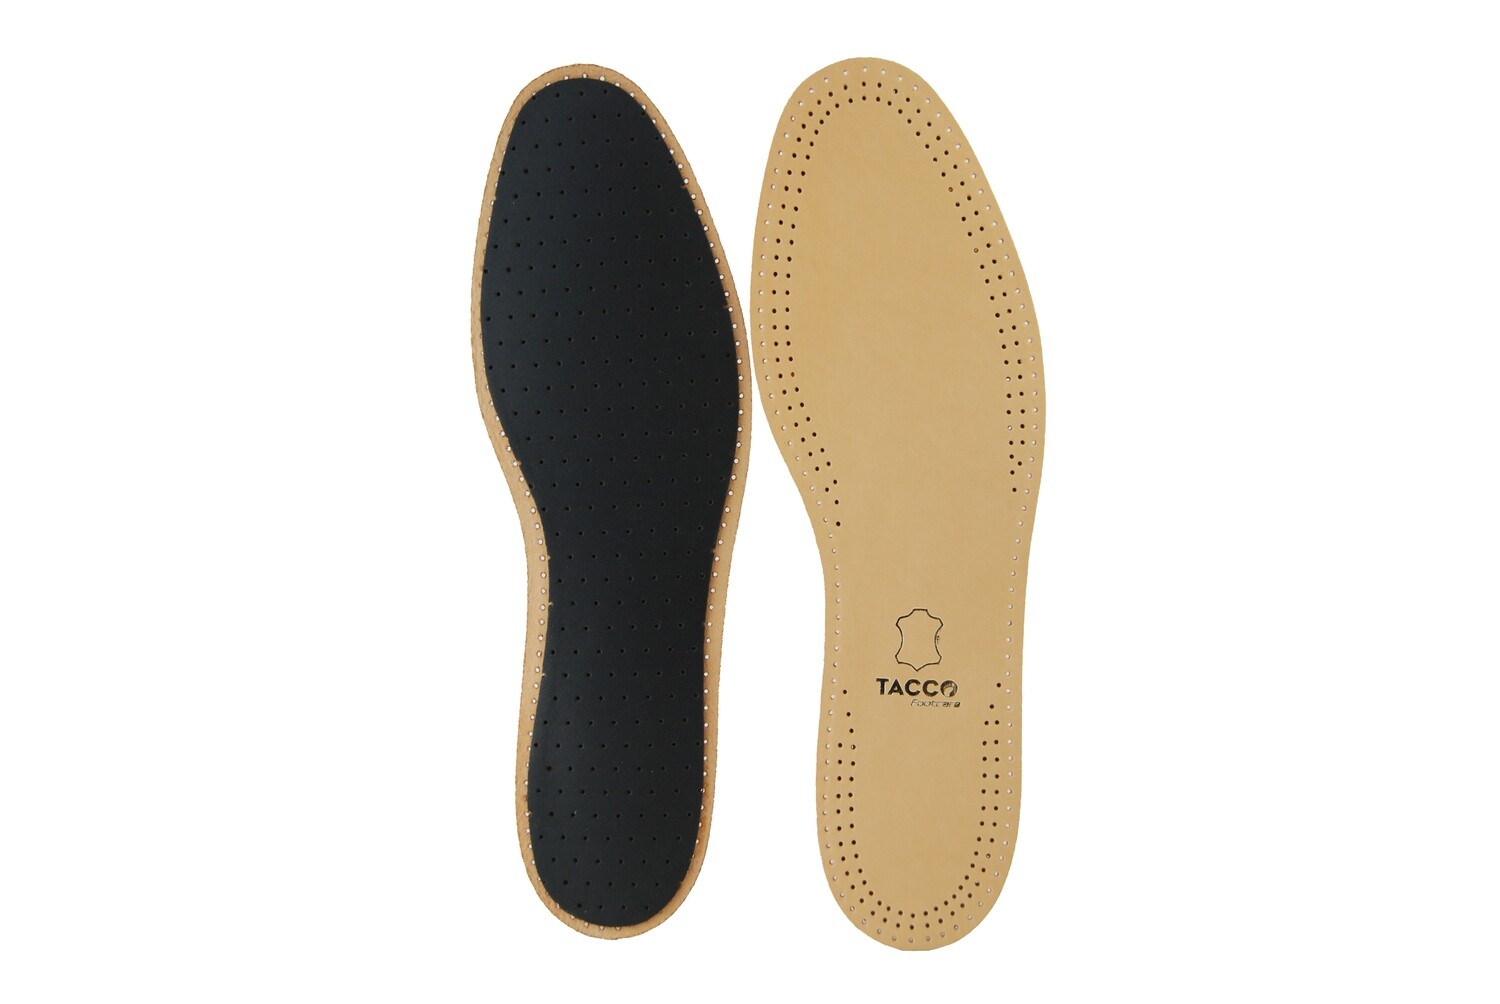 TACCO Leather Insoles